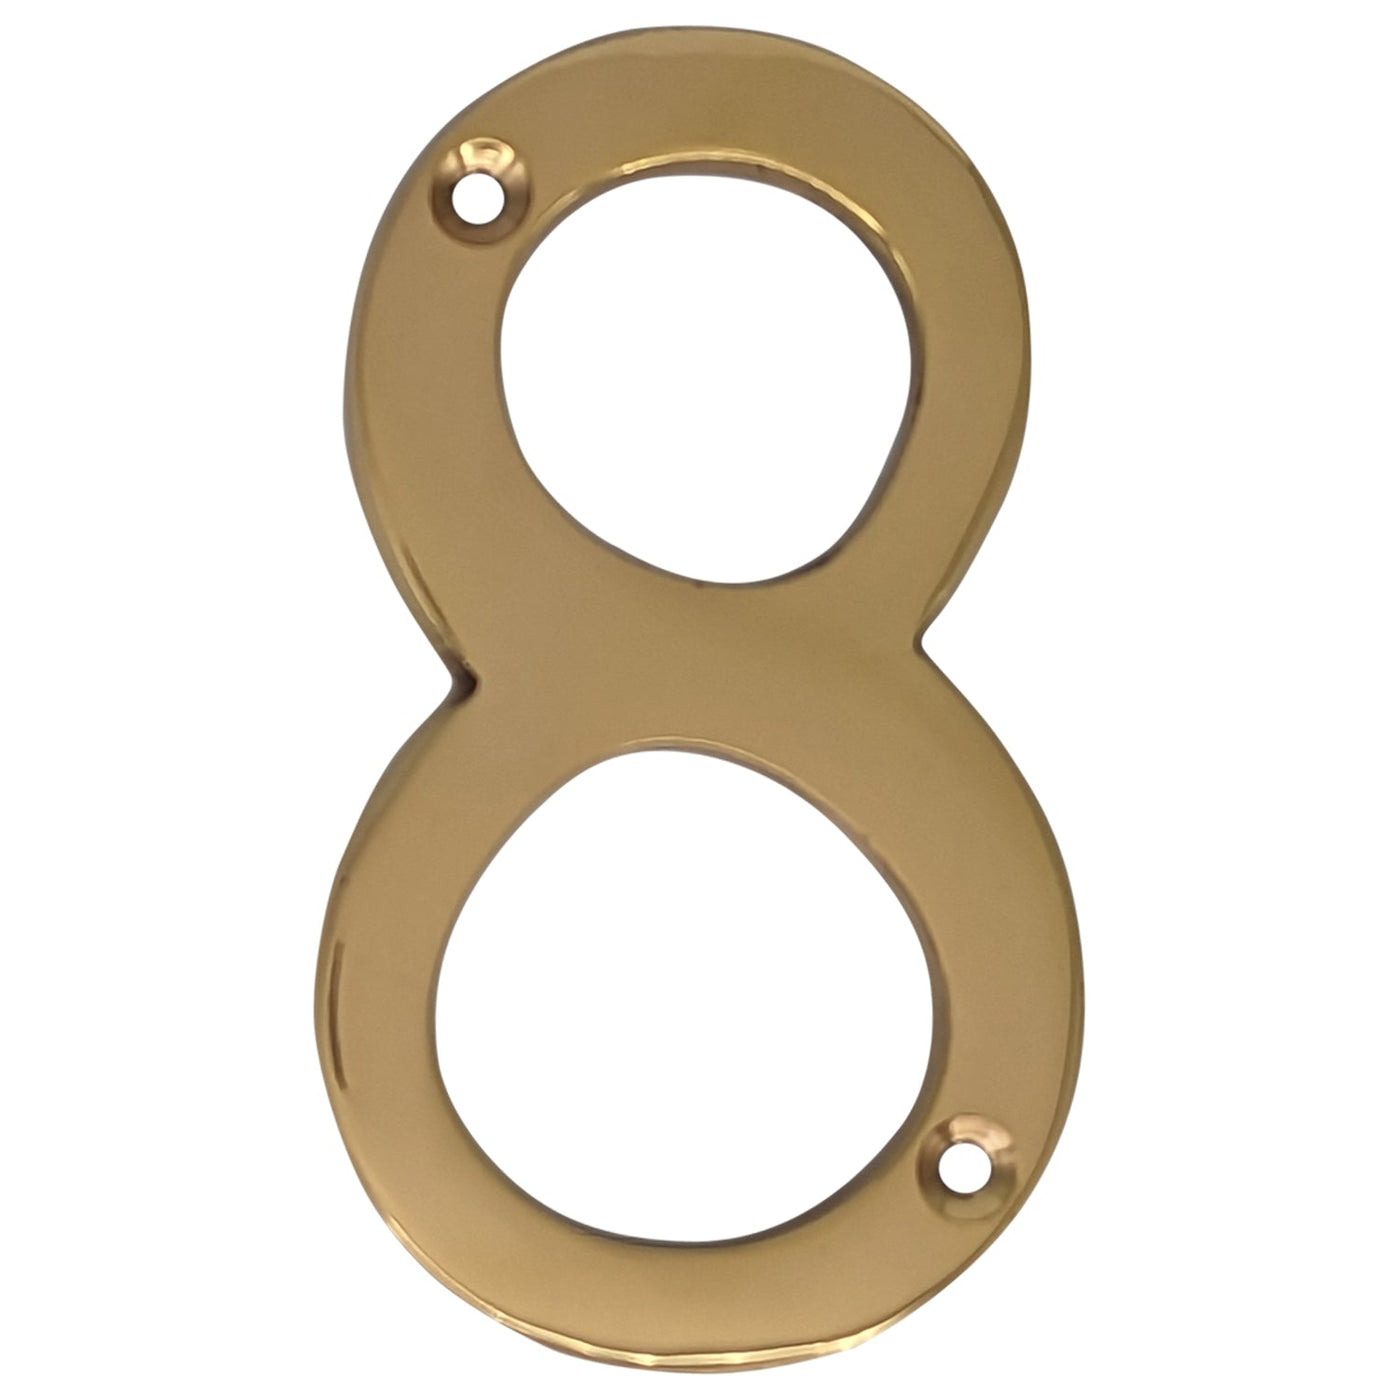 4 Inch Tall House Number 8